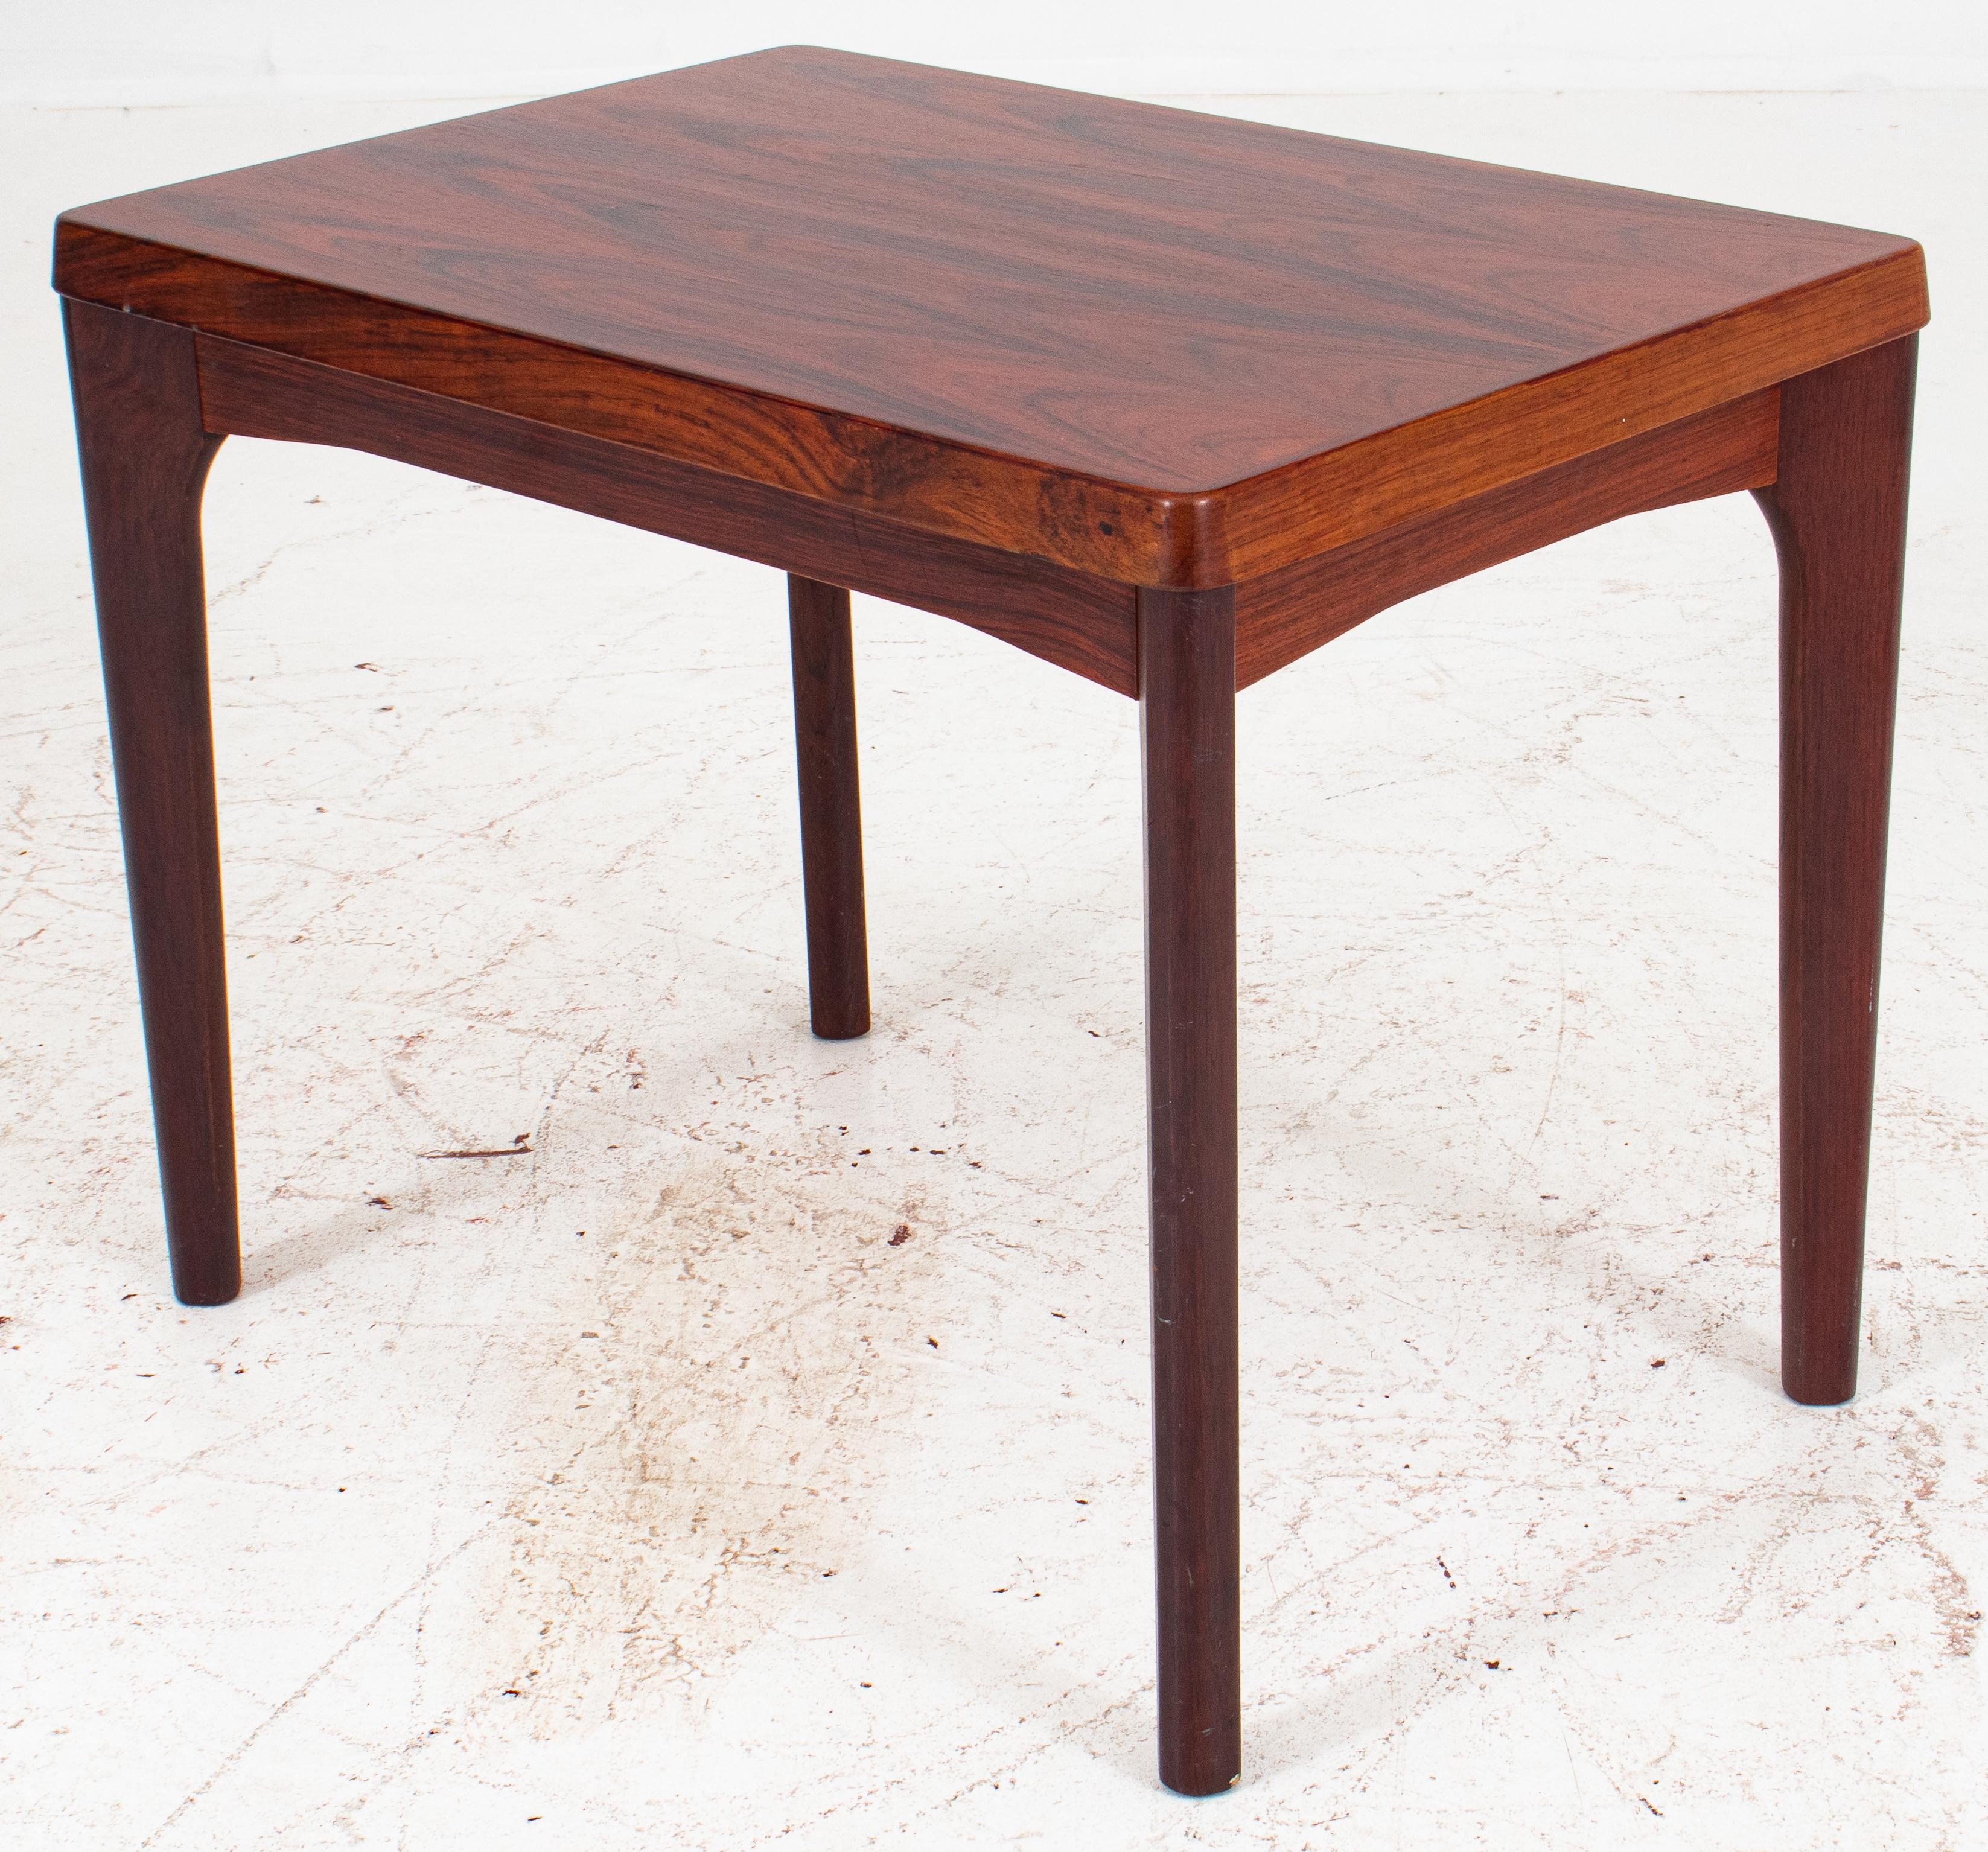 Danish Modern stained walnut side table, rectangular with rounded corners on tapering angled legs, the underside struck 